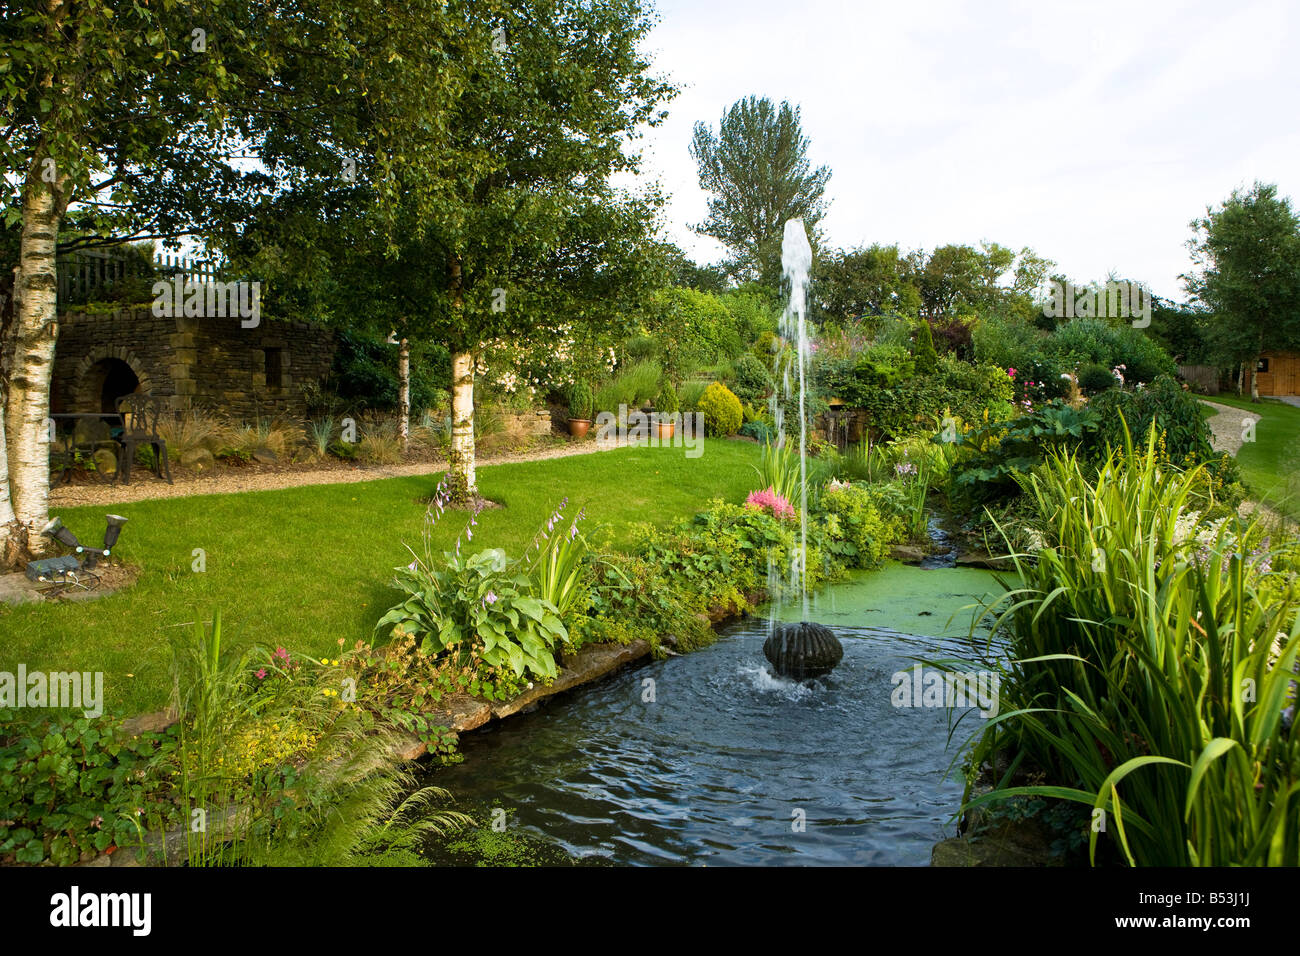 silver birch trees and small pool in garden, with a fountain Stock Photo